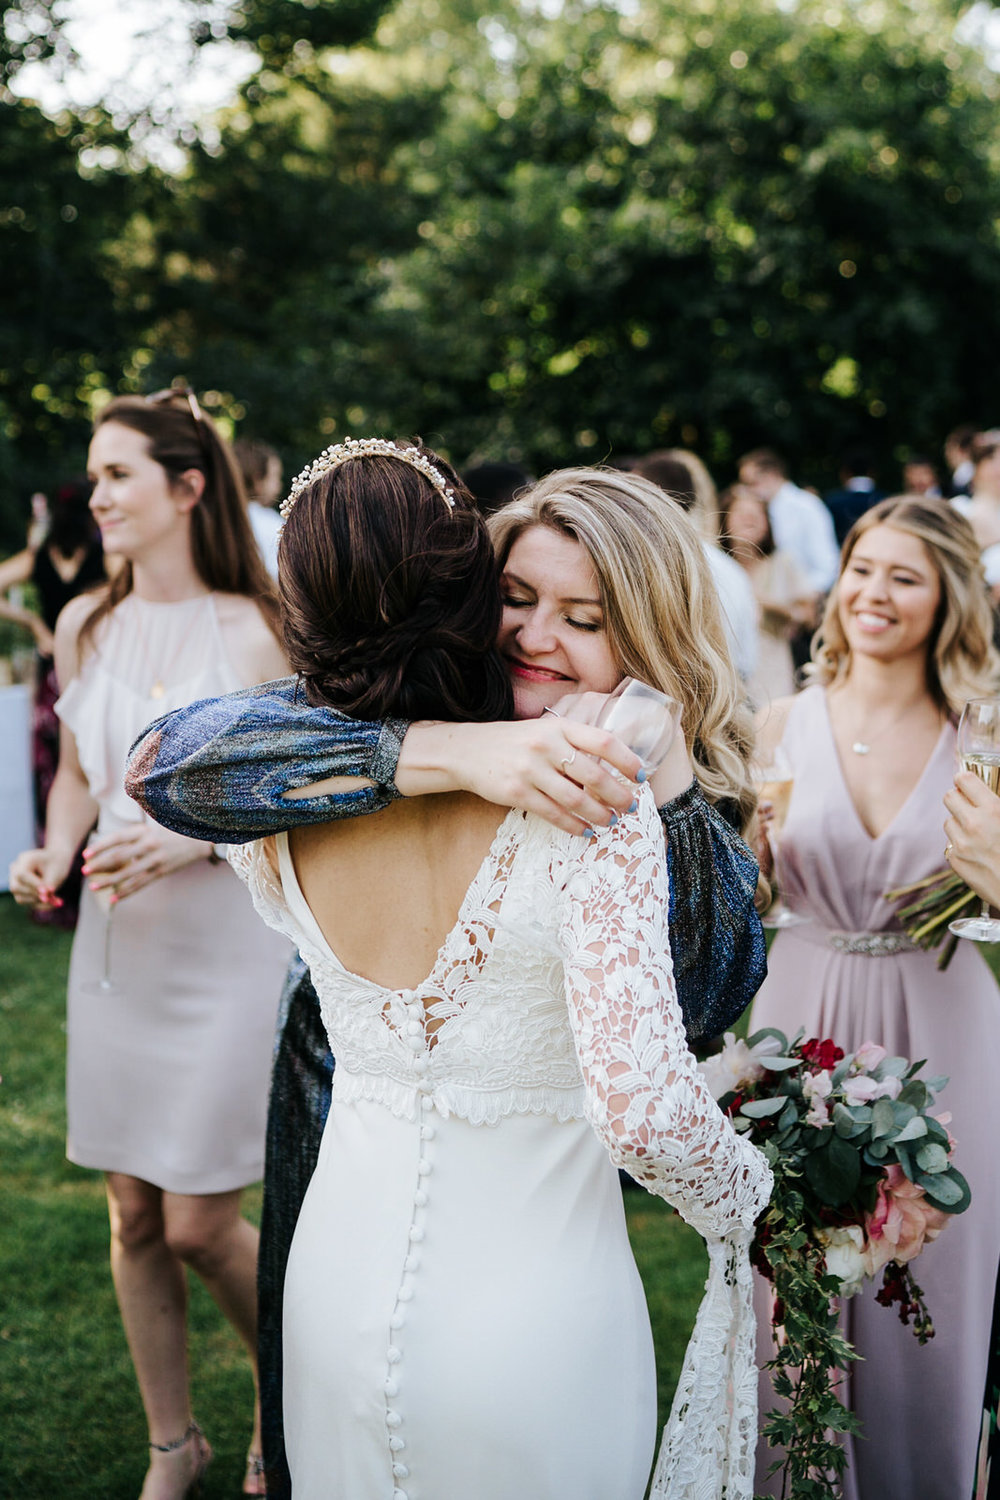  Bride receives hug from one of the guests during drinks ceremony 